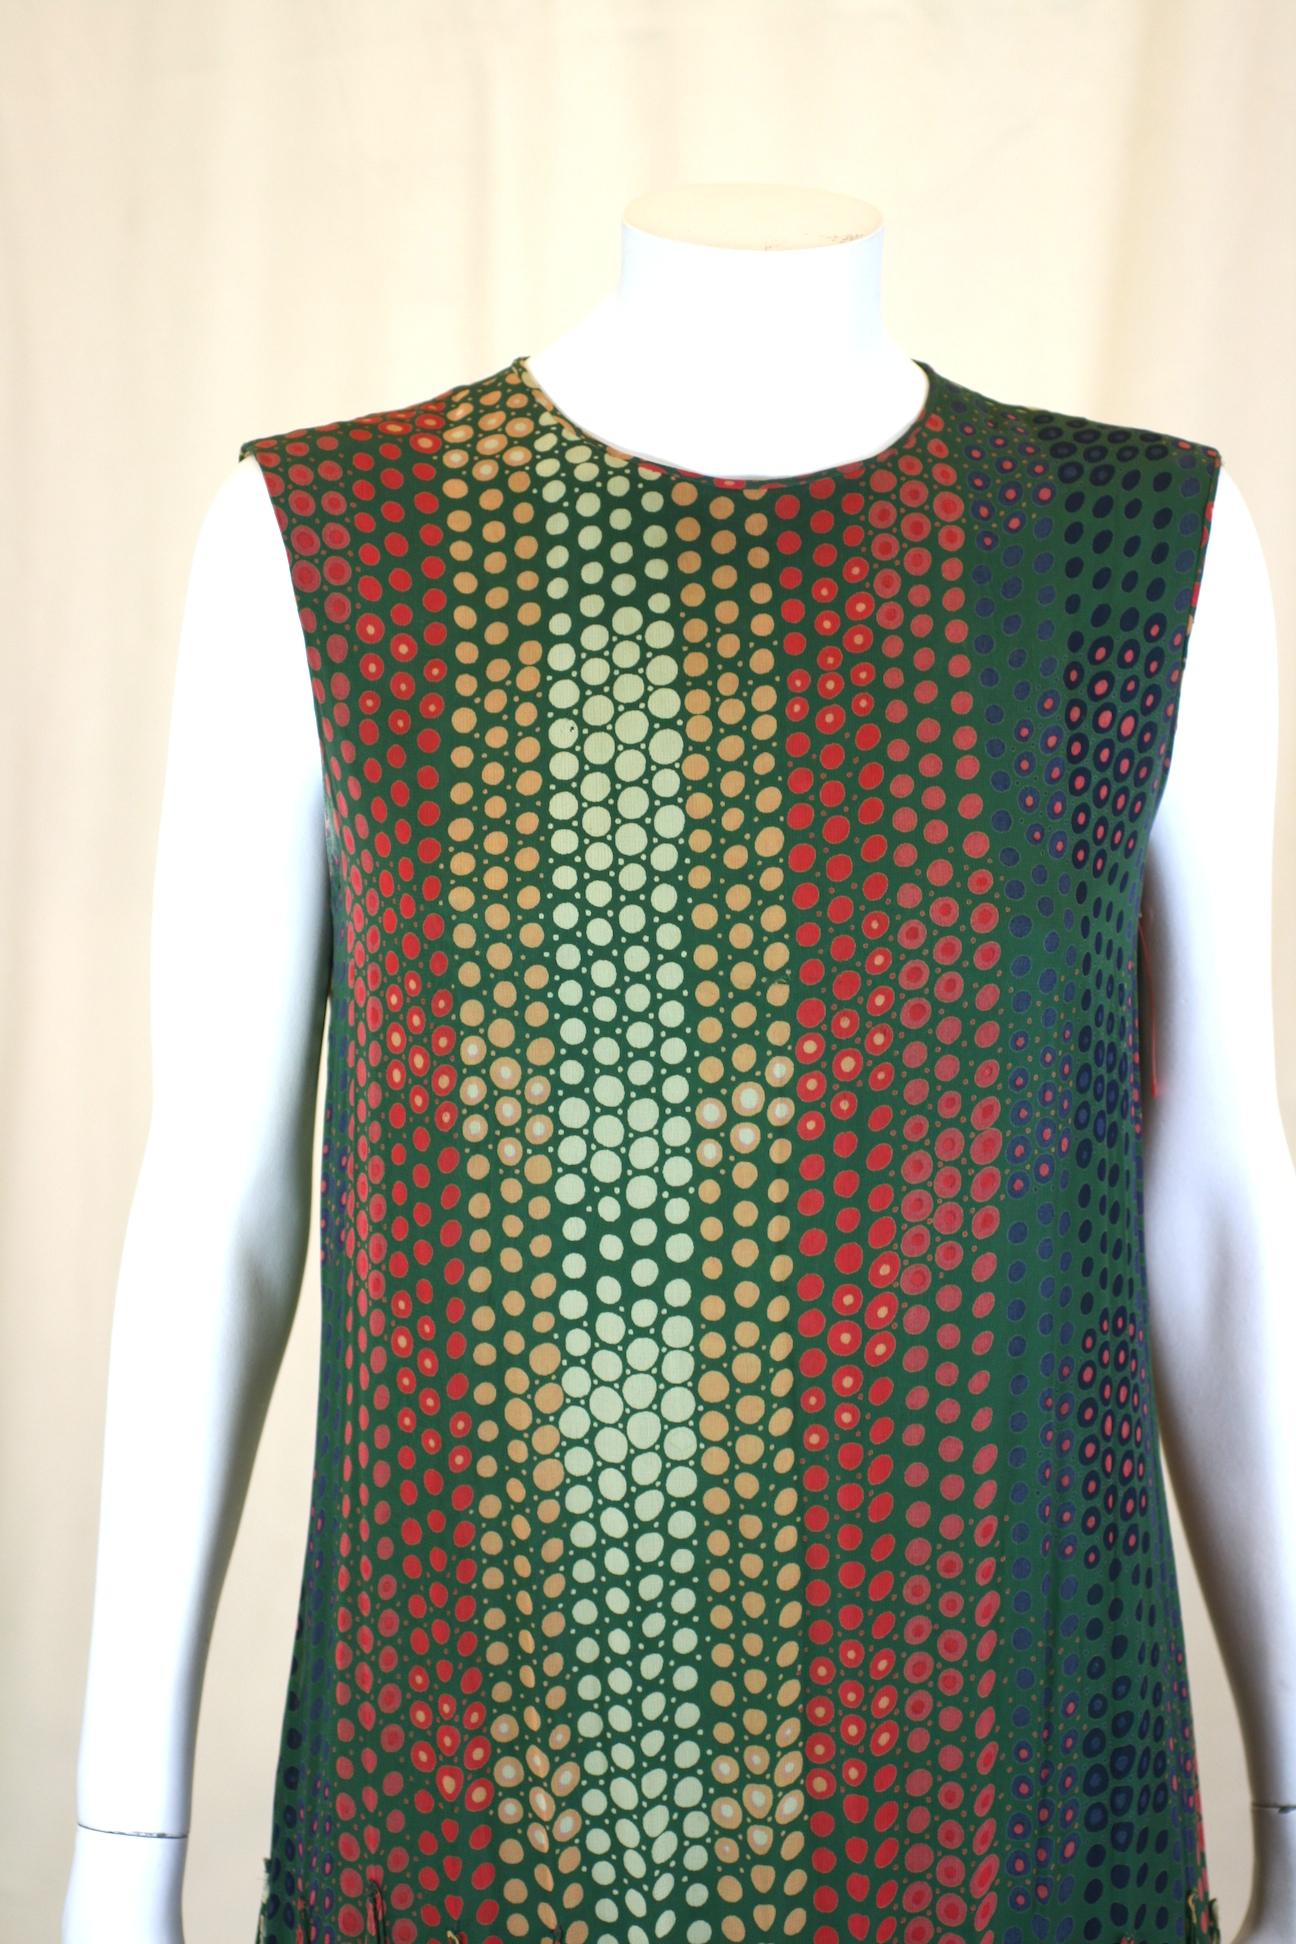 Unusual Pierre Cardin Op Art Scarf Hem Dress in hyponotic rayon georgette print. A simple sleeveless sheath has dozens of scarves applied at hip level to create a super interesting silhouette with movement. Very possibly designed by Jean Paul